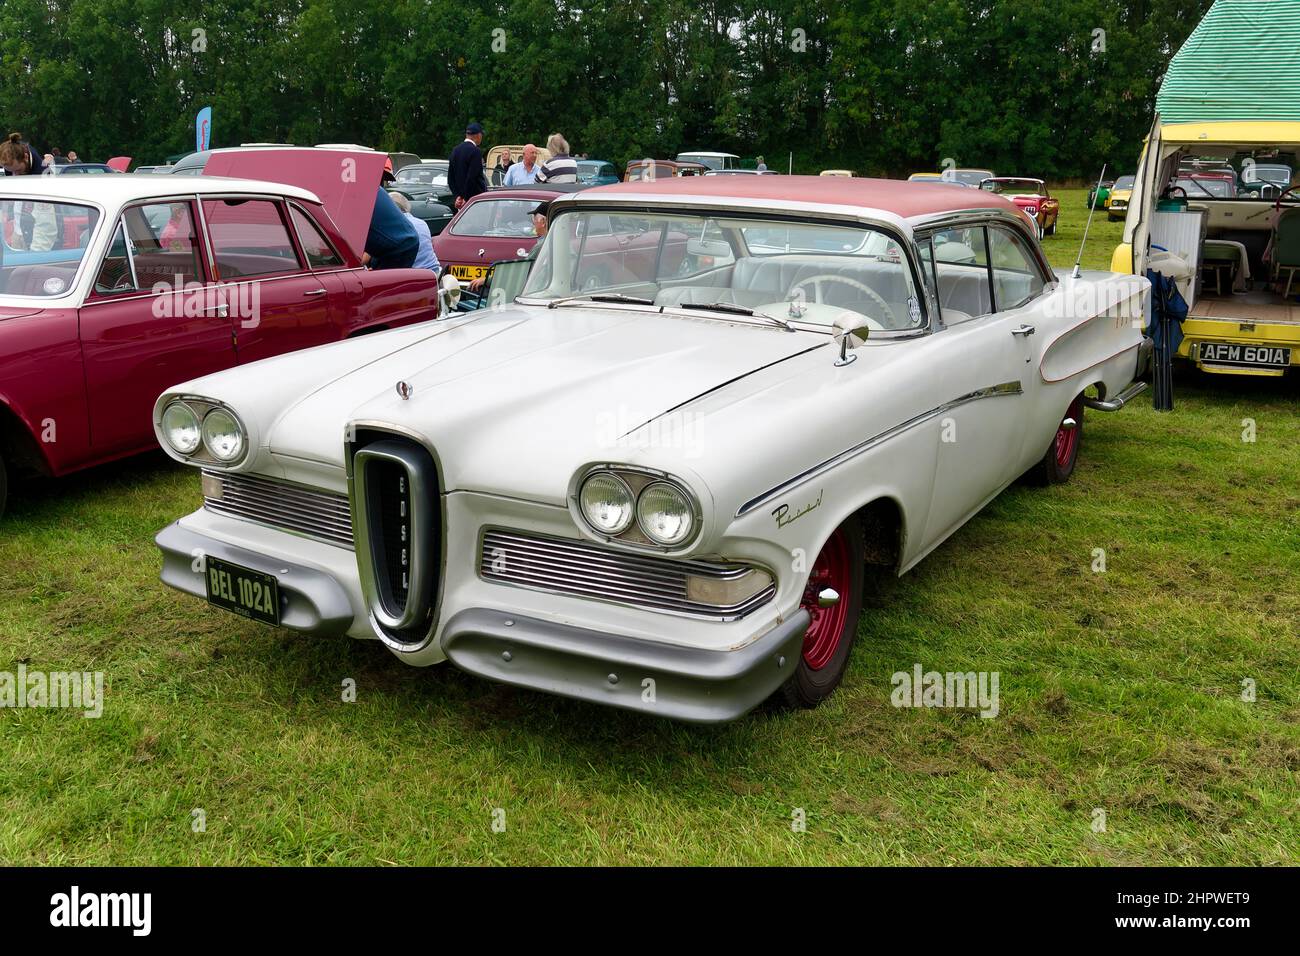 Westbury, Wiltshire, UK - September 5 2021:A 1958 Ford Edsel Pacer 2-Door hardtop at the 2021 White Horse Classic and Vintage Car Show Stock Photo